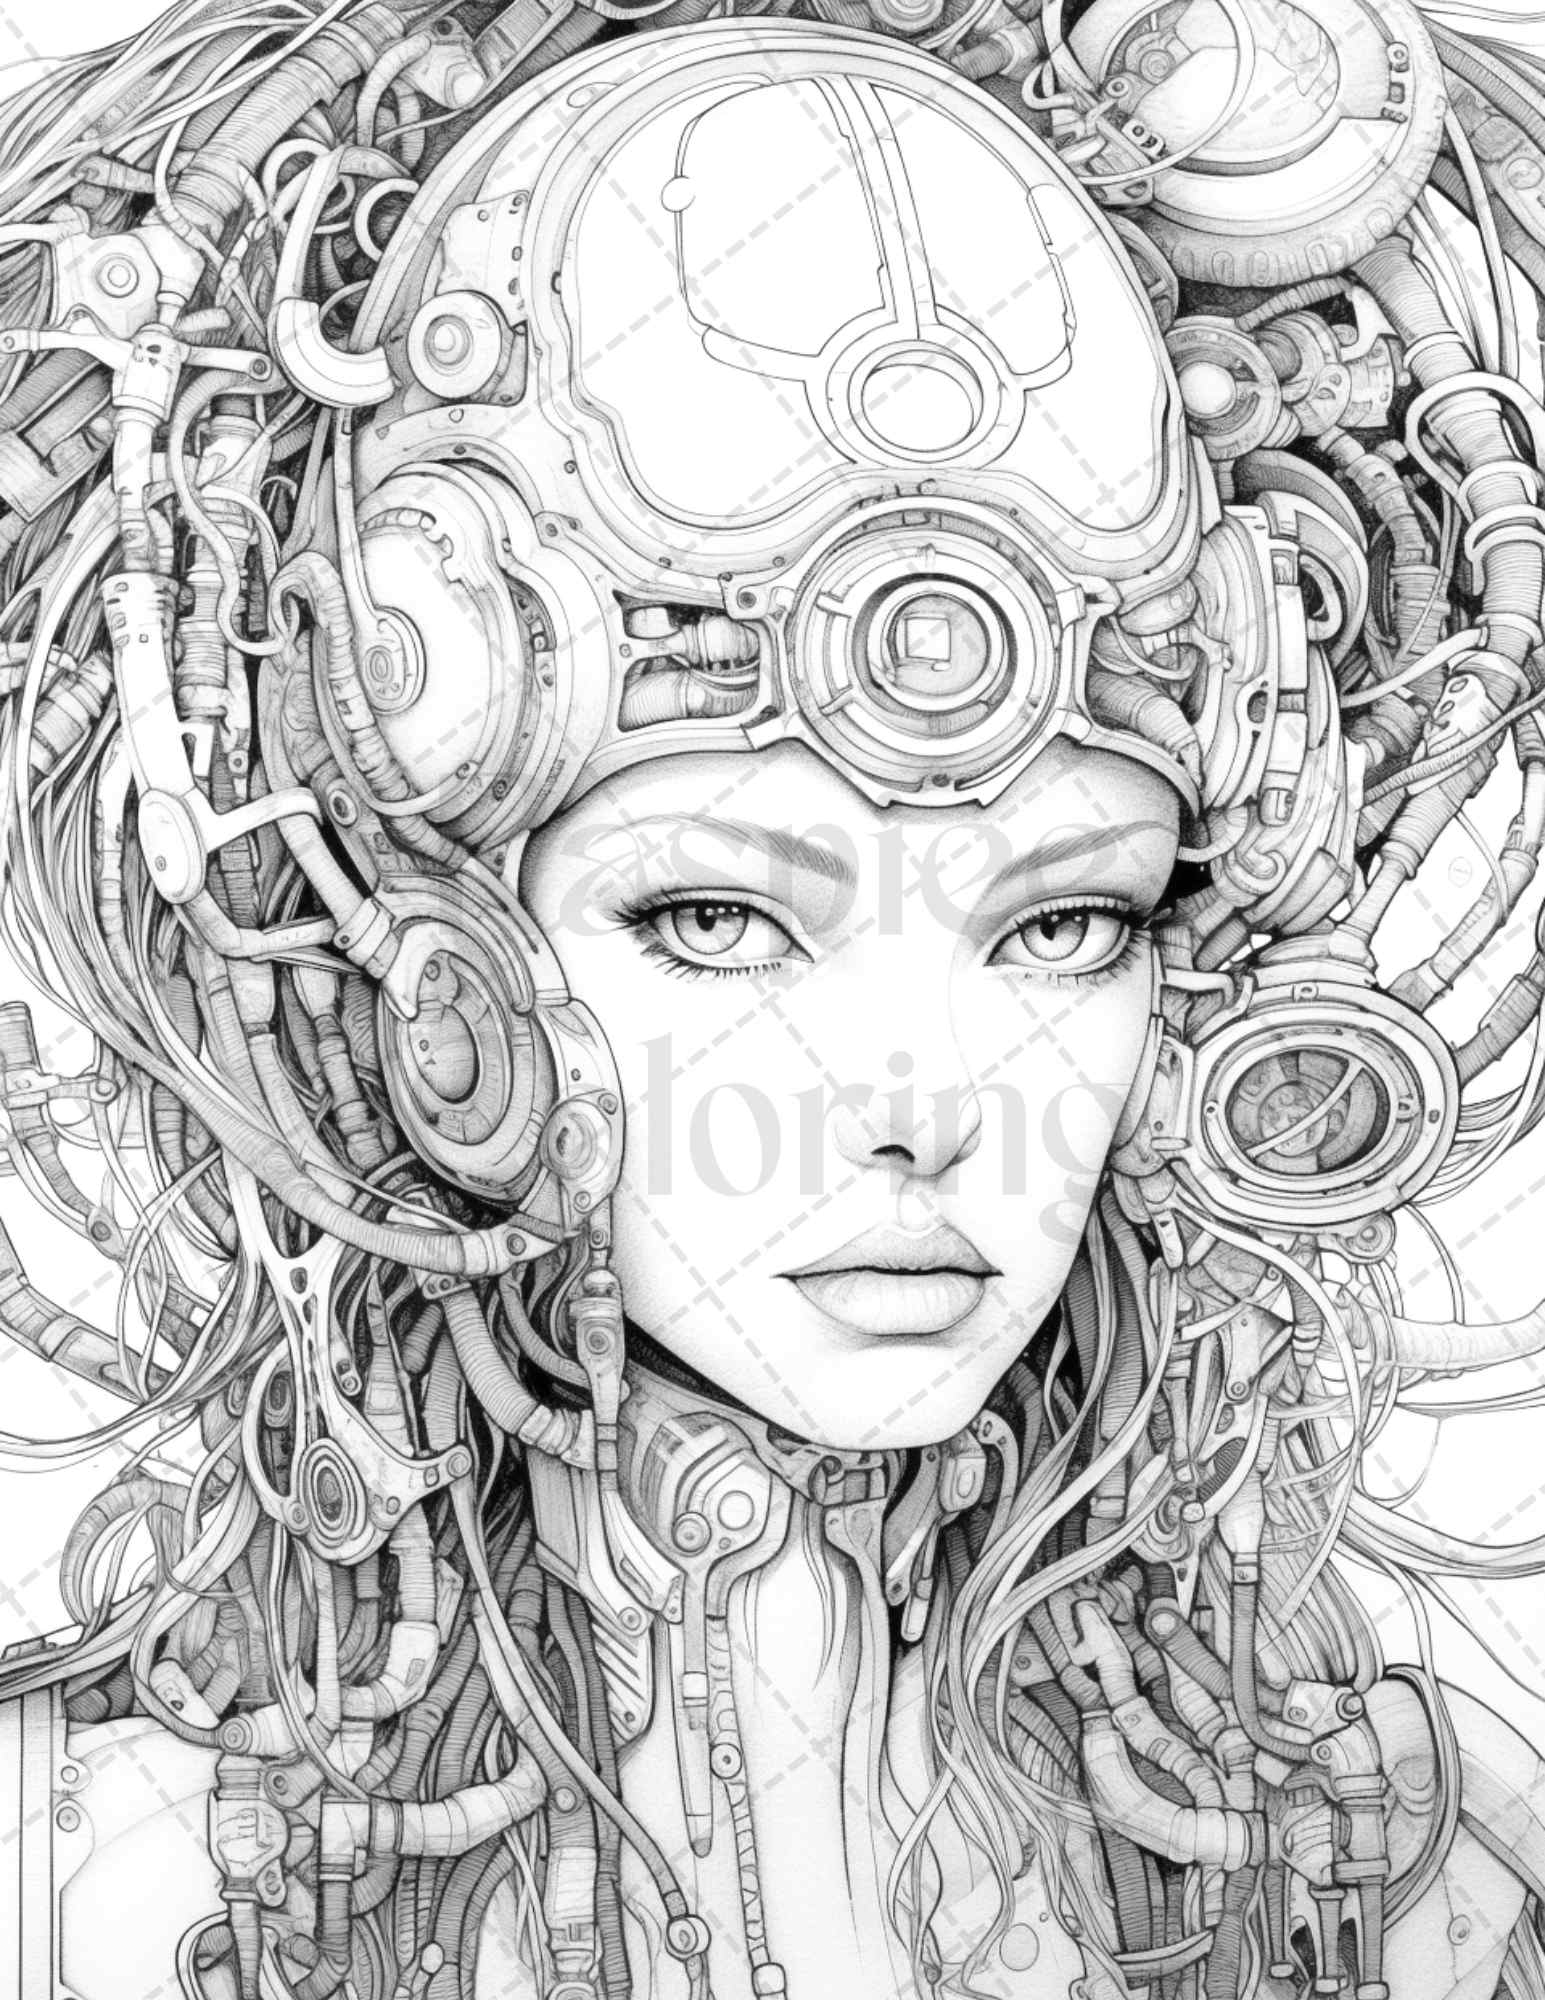 40 Beautiful Cyborg Girls Grayscale Coloring Pages Printable for Adults, PDF File Instant Download - raspiee